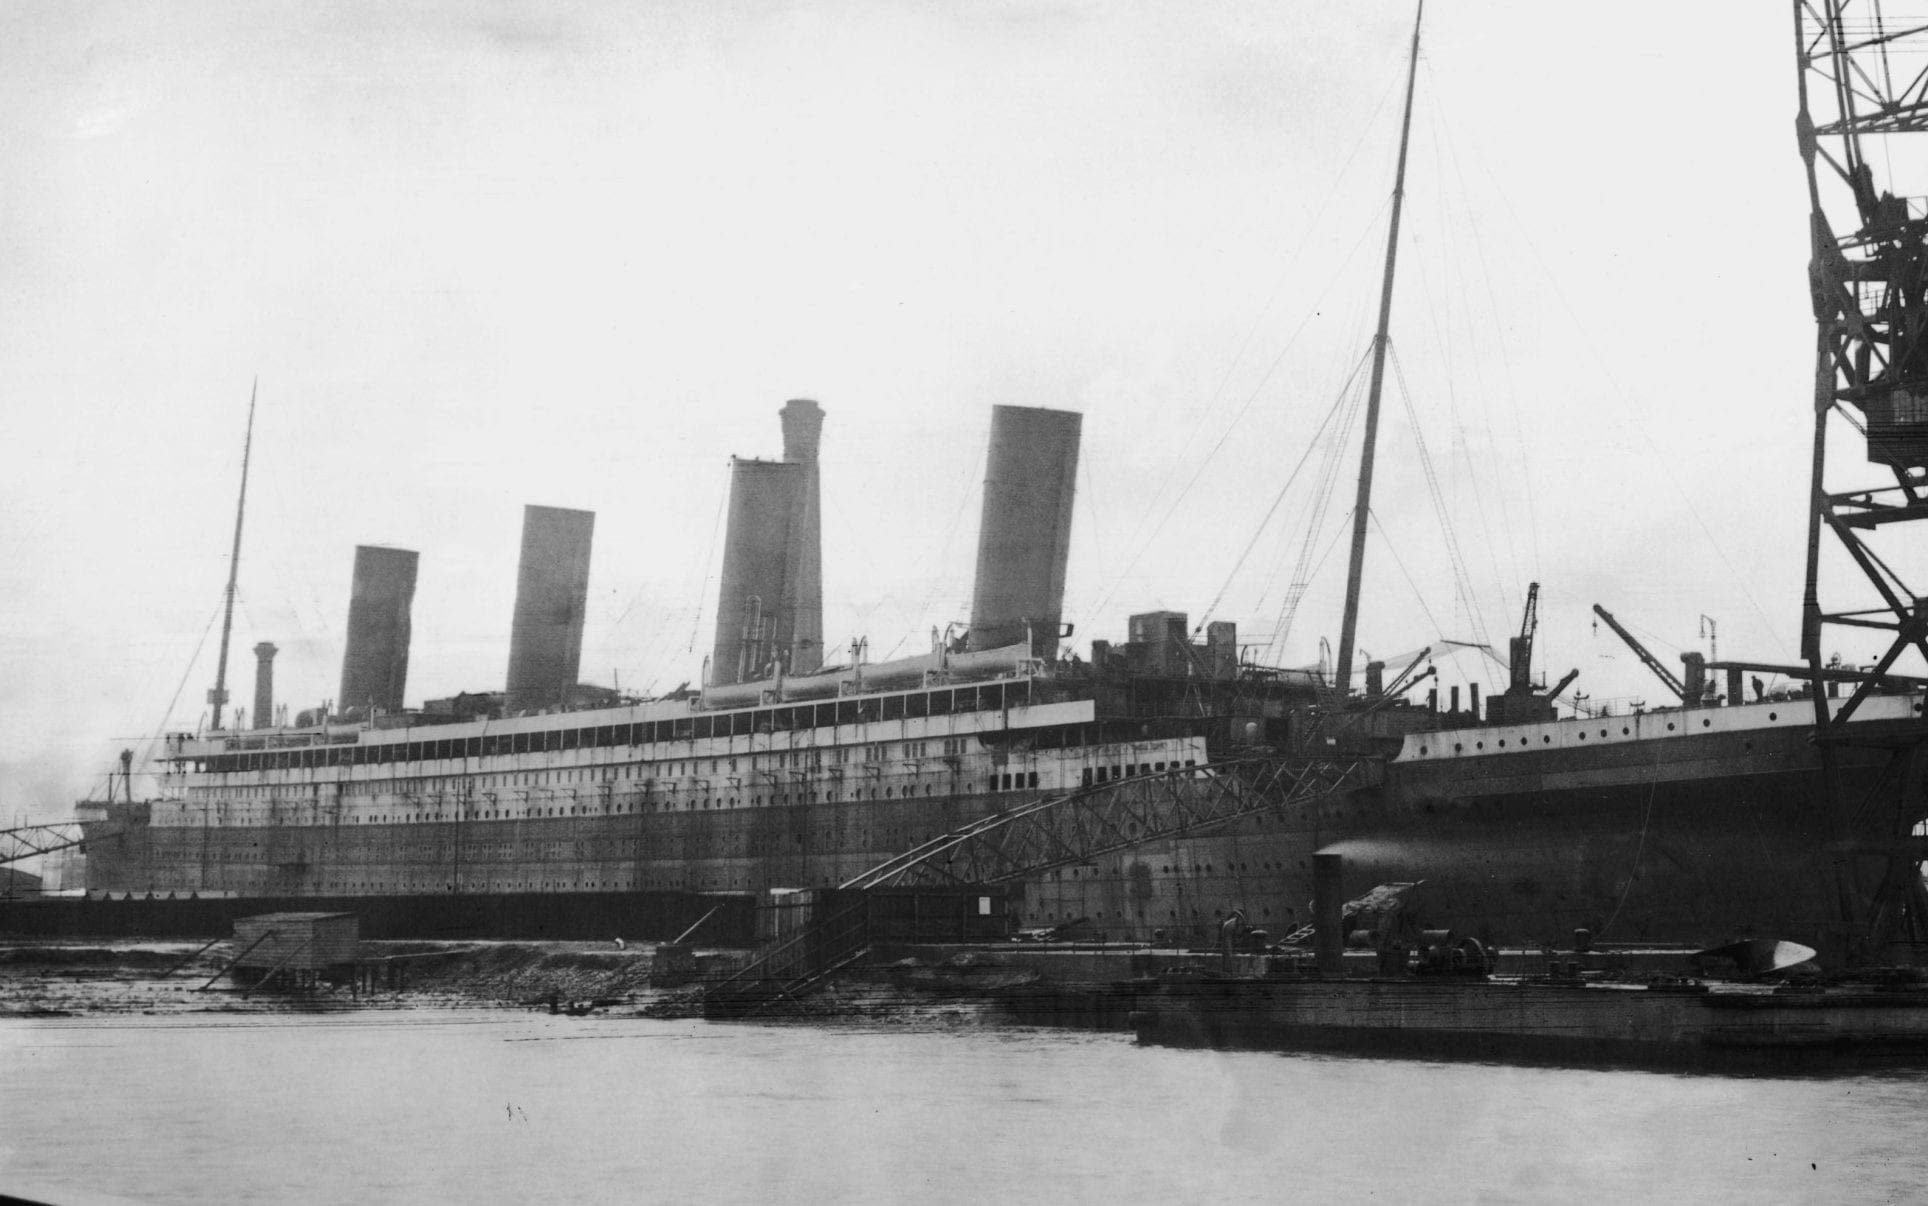 I won’t let Titanic shipyard sink, vows Harland & Wolff chief